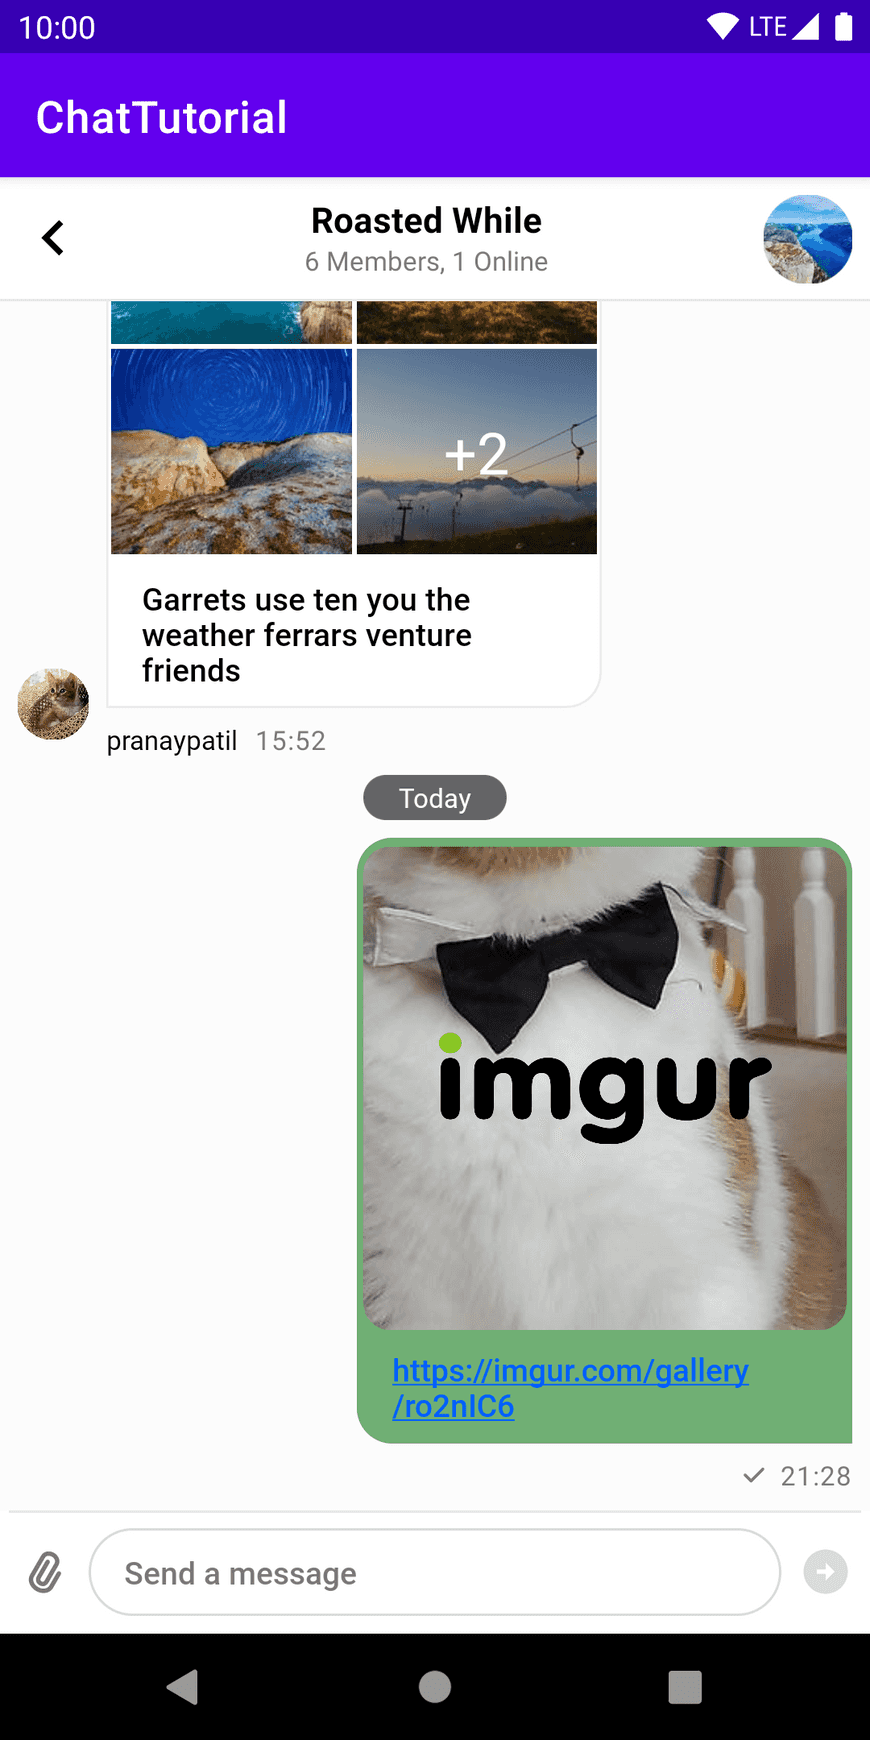 Imgur Logo overlay on the in-app messaging chat interface